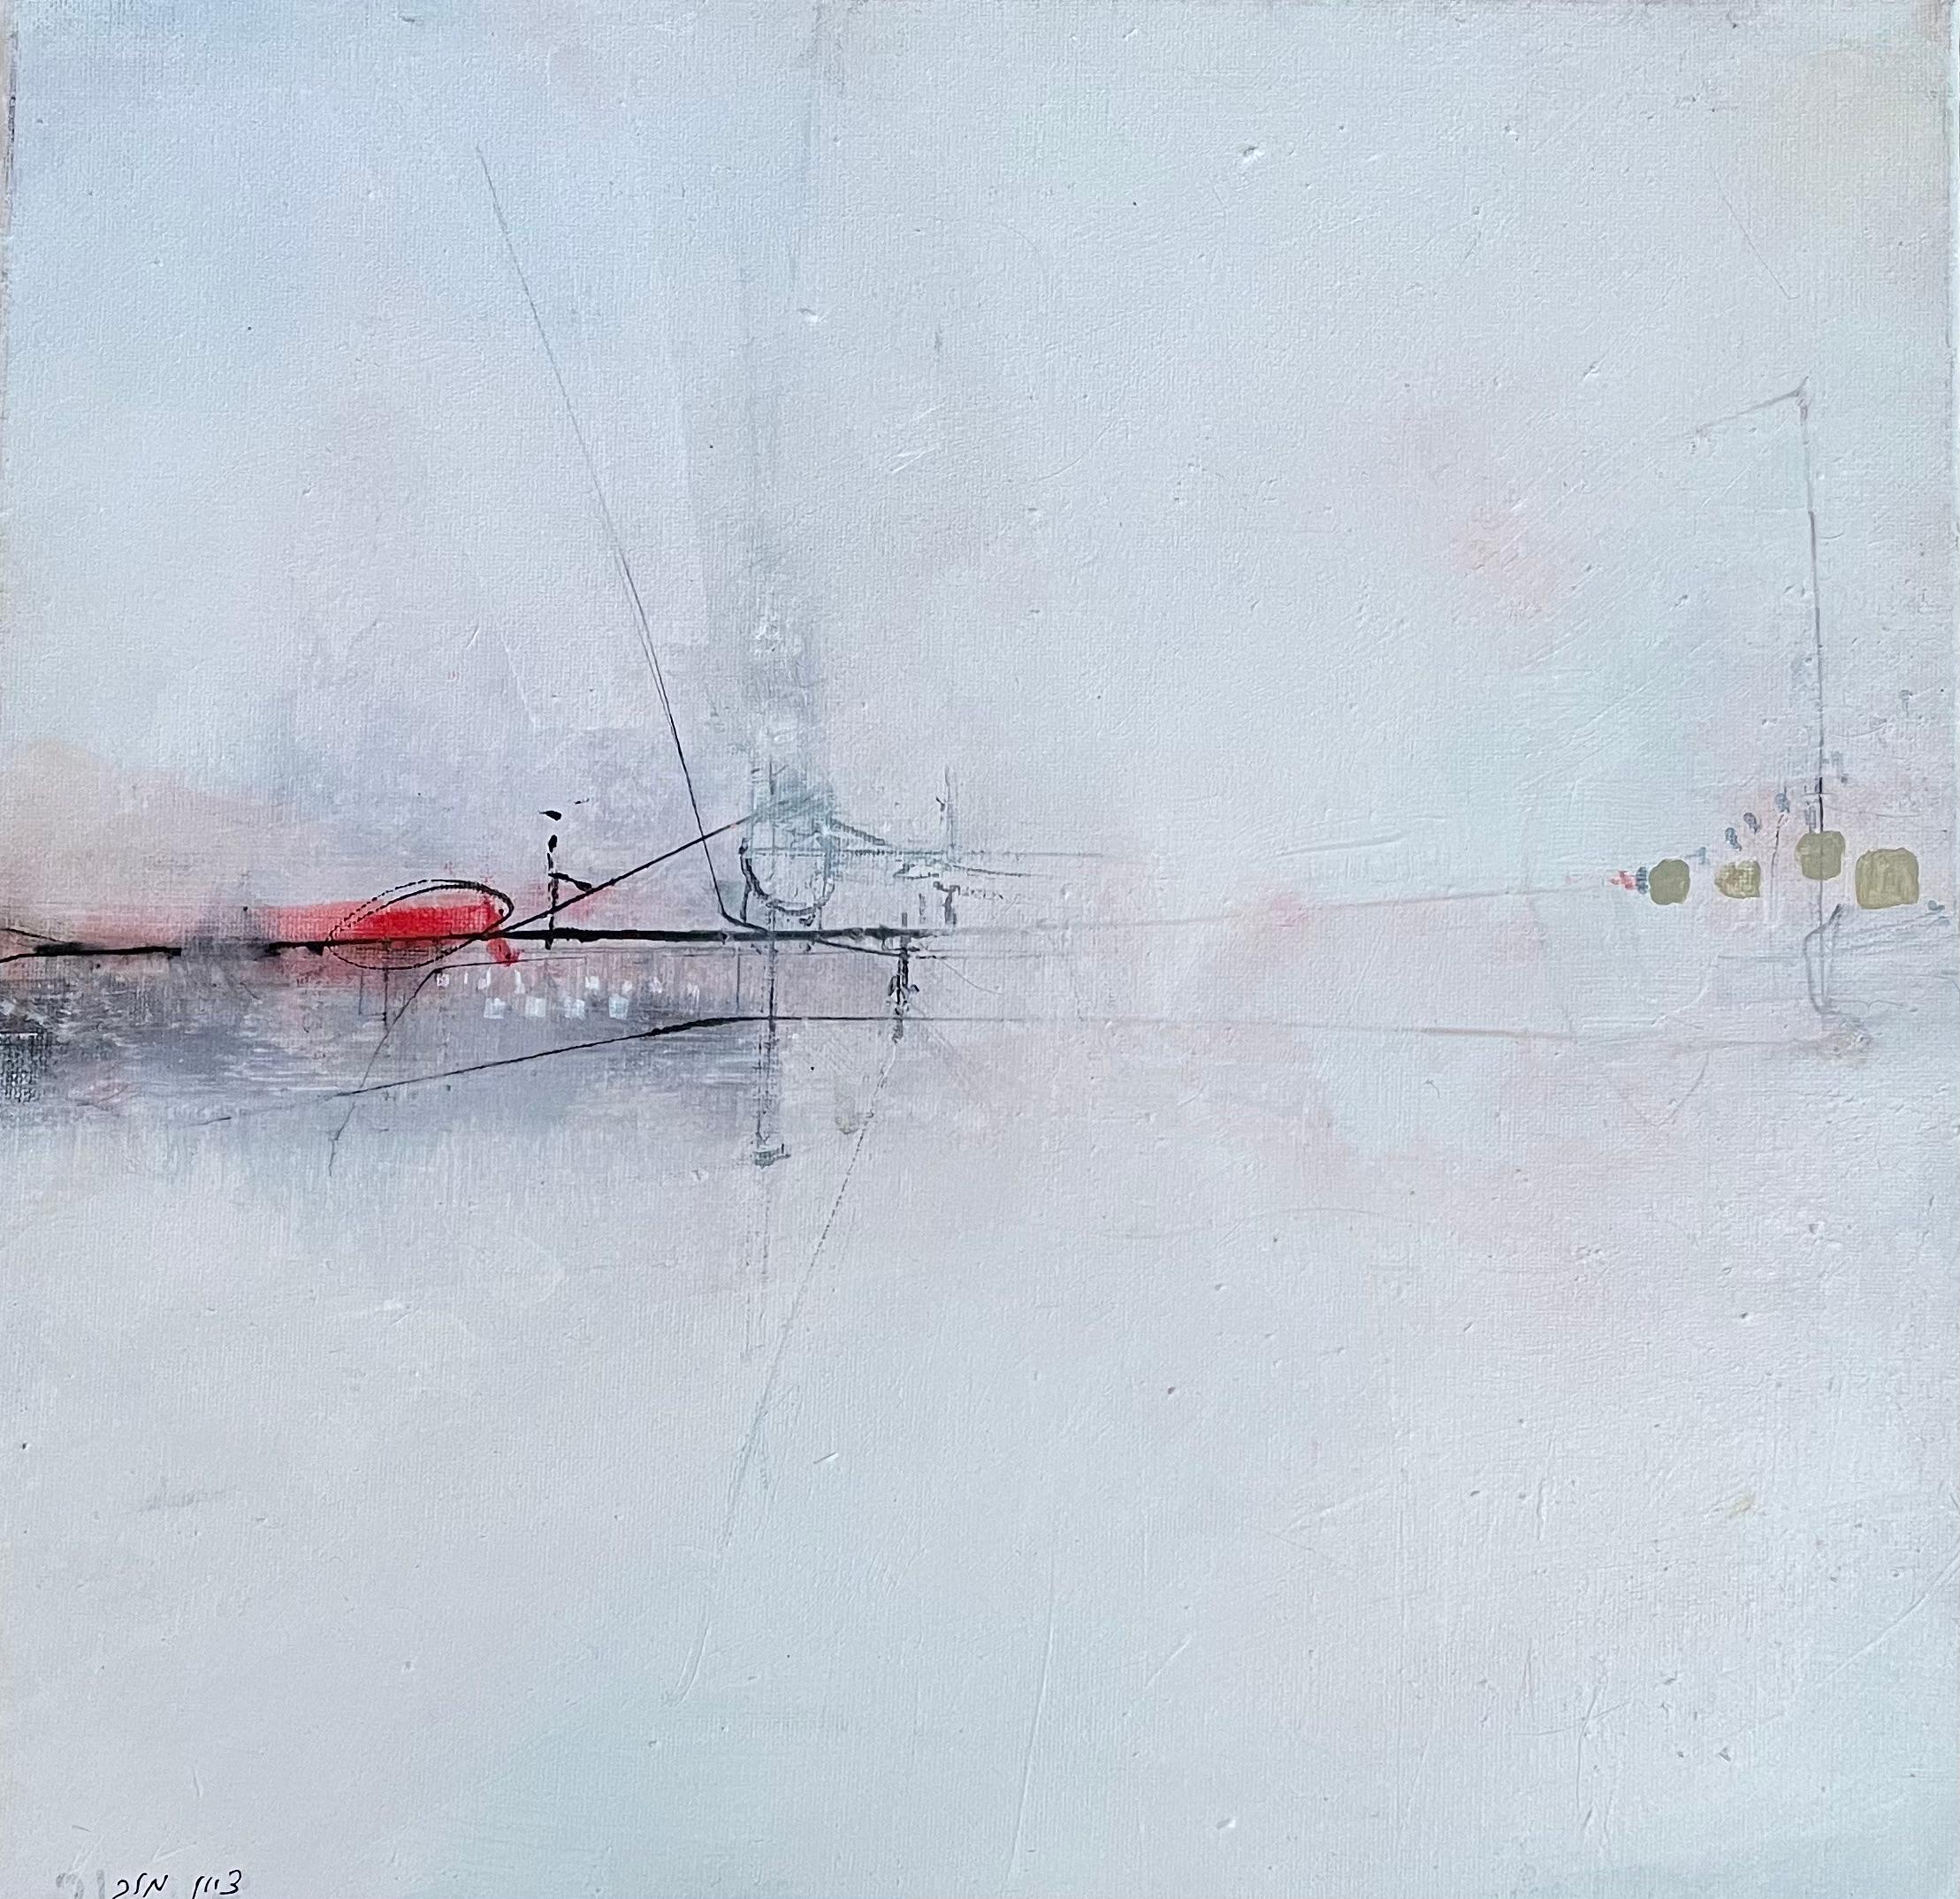 Zion Mor Landscape Painting - "Misty Bridge" White & Red Minimal Contemporary Abstract Urban Landscape